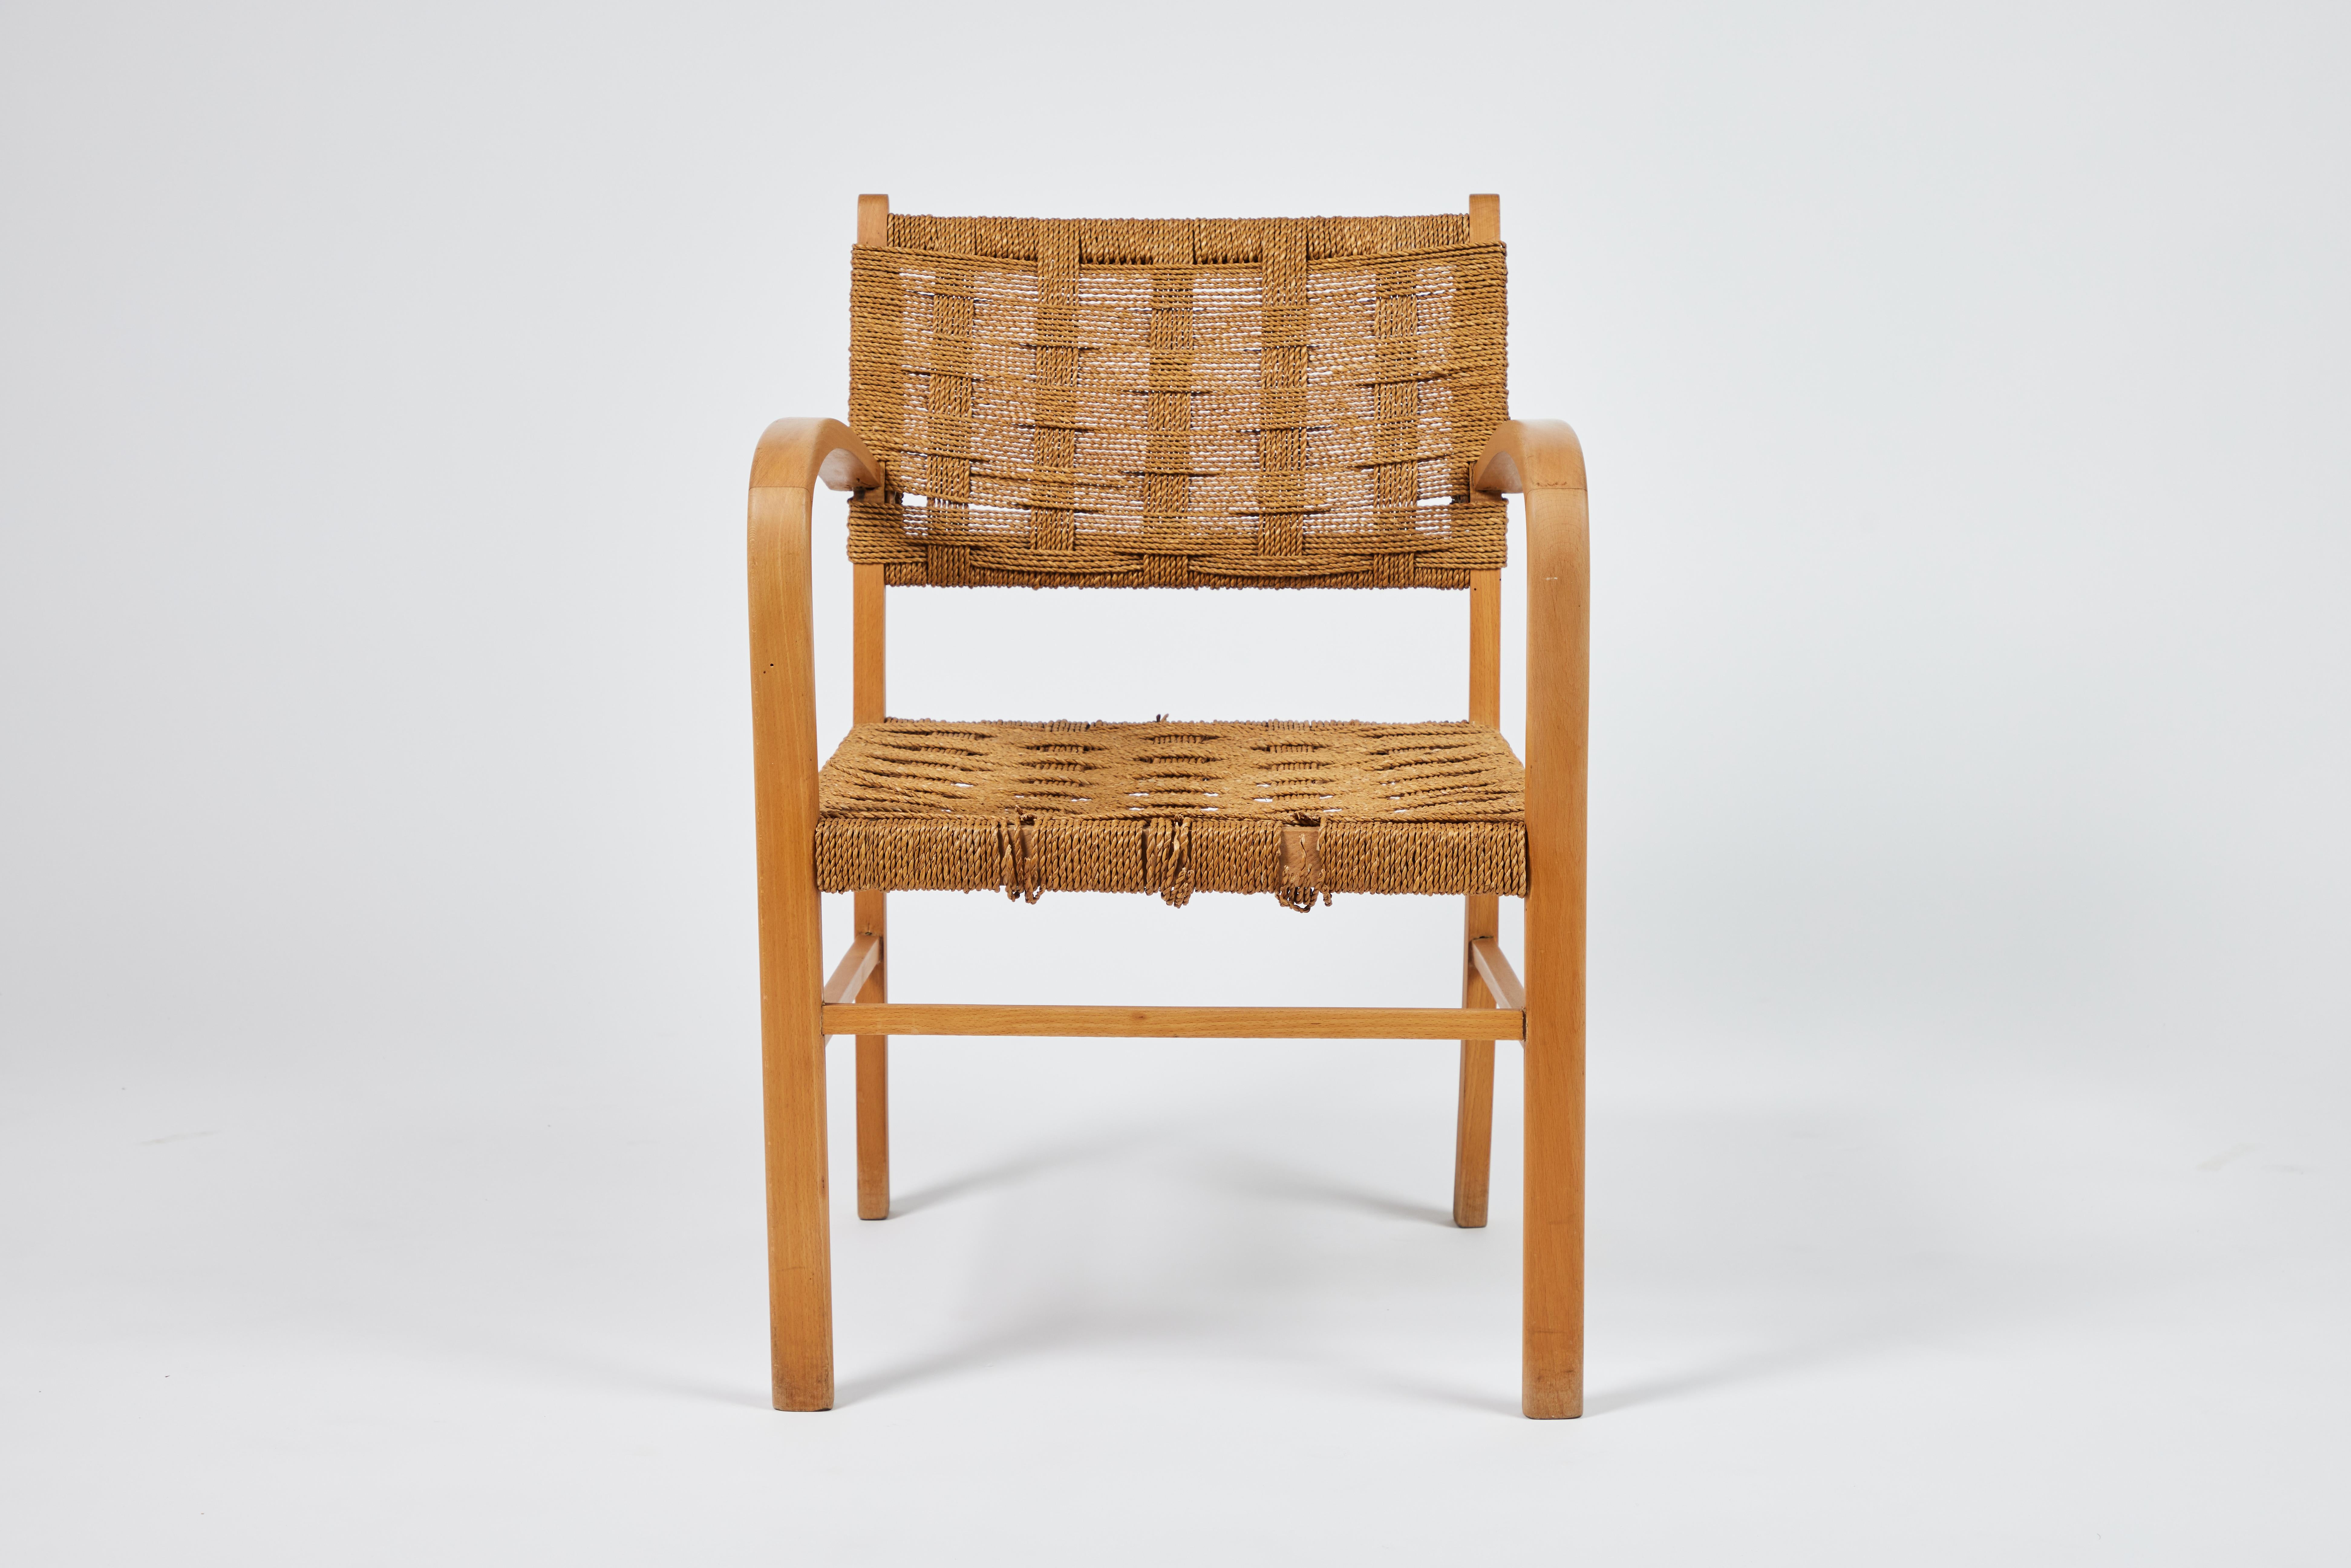 Midcentury French oak arm chair with curved, sculptural arms. Woven seat and back supports are comprised of groups of 8 thin ropes form each 